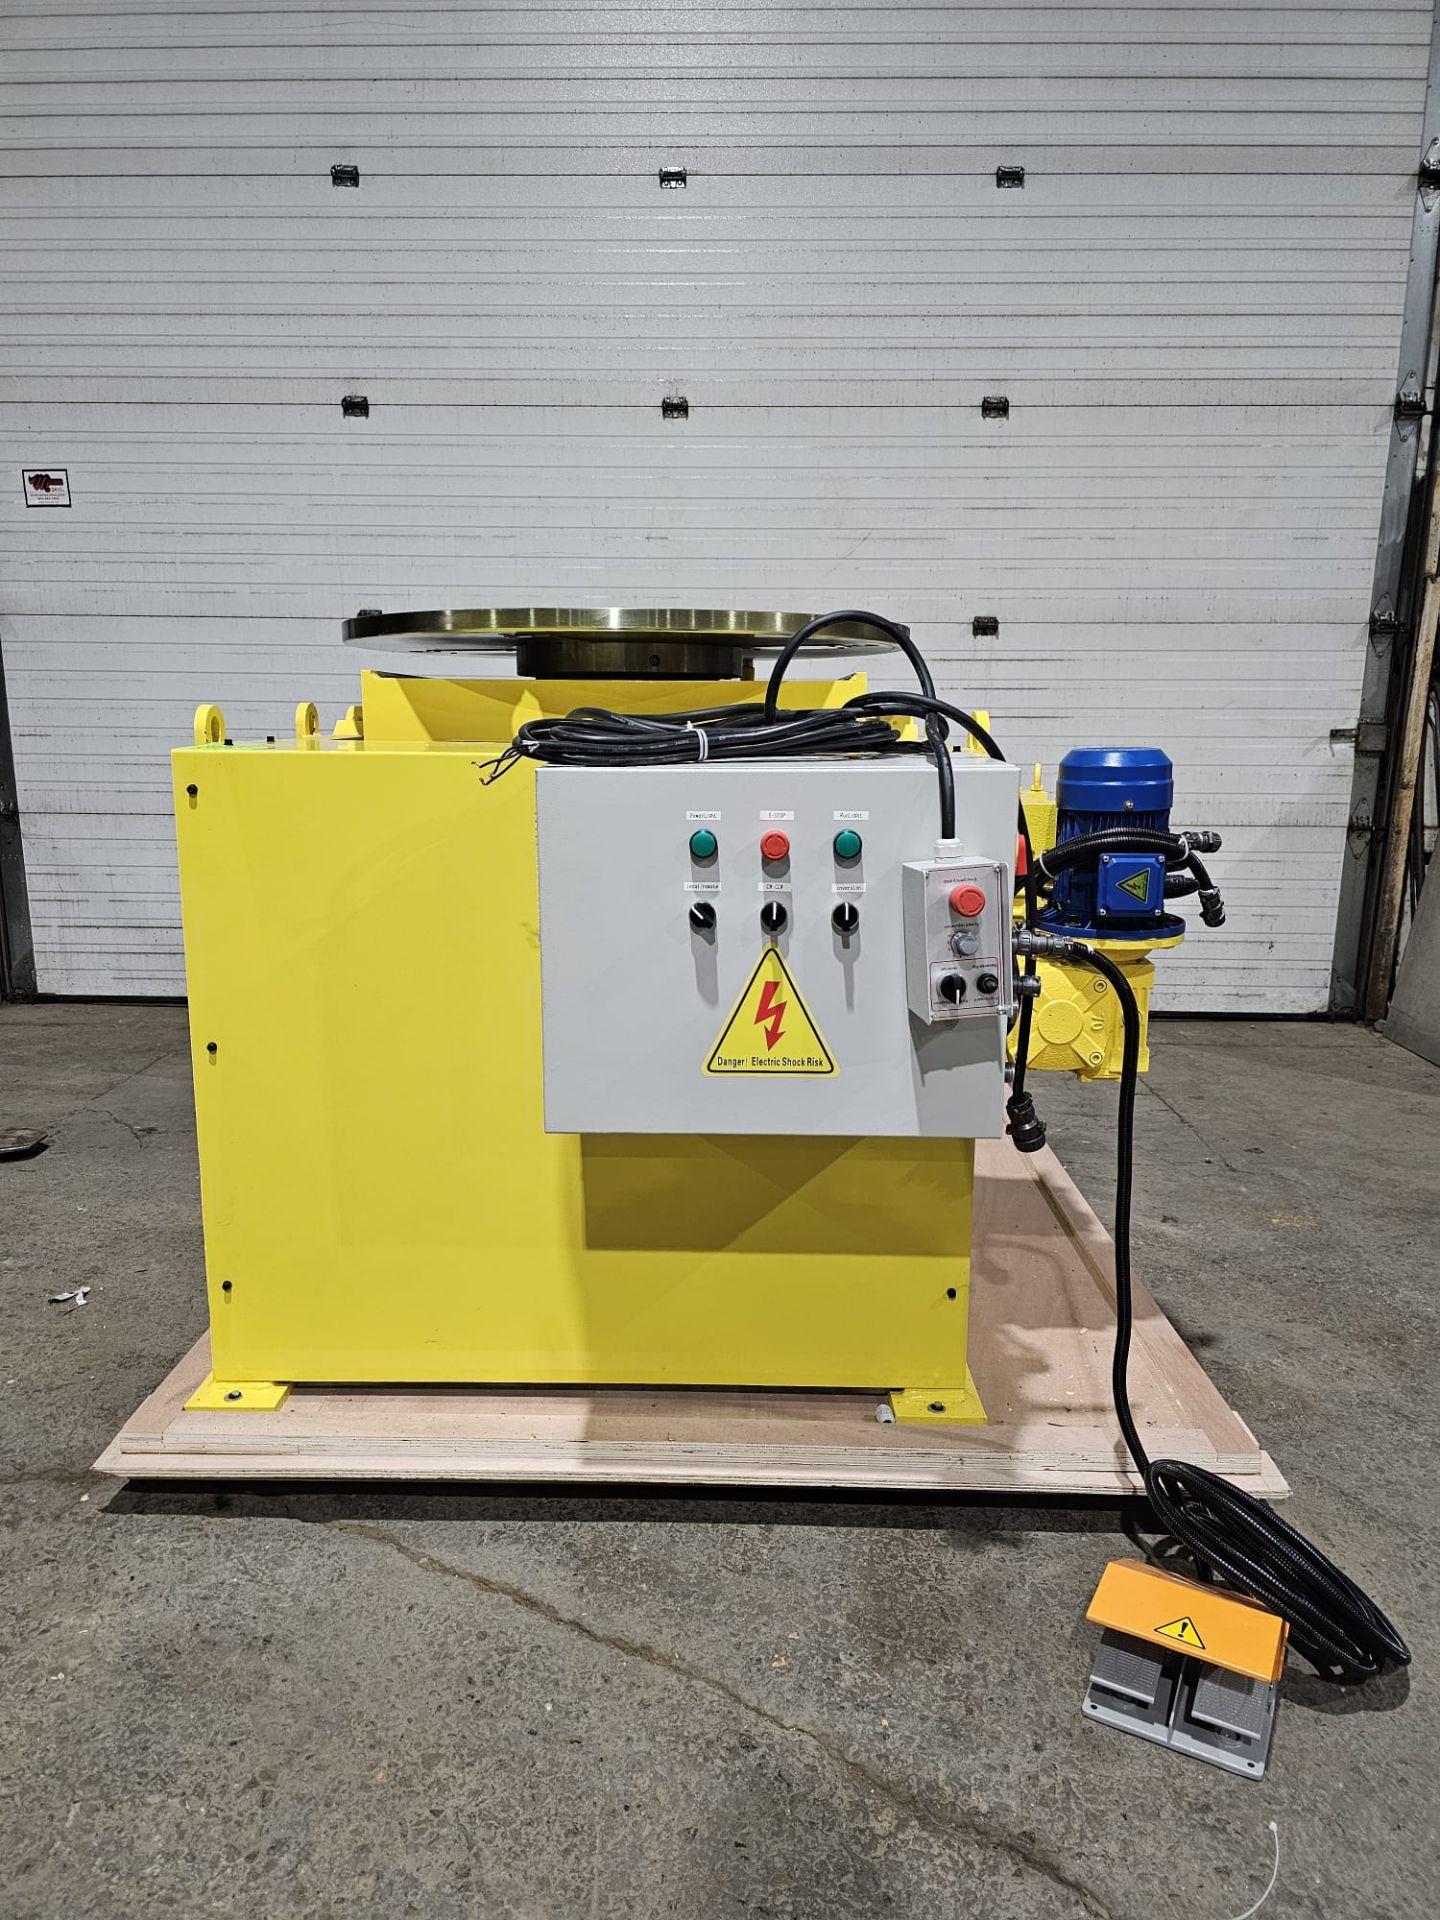 Verner model VD-2500 WELDING POSITIONER 2500lbs capacity - tilt and rotate with variable speed drive - Image 2 of 7